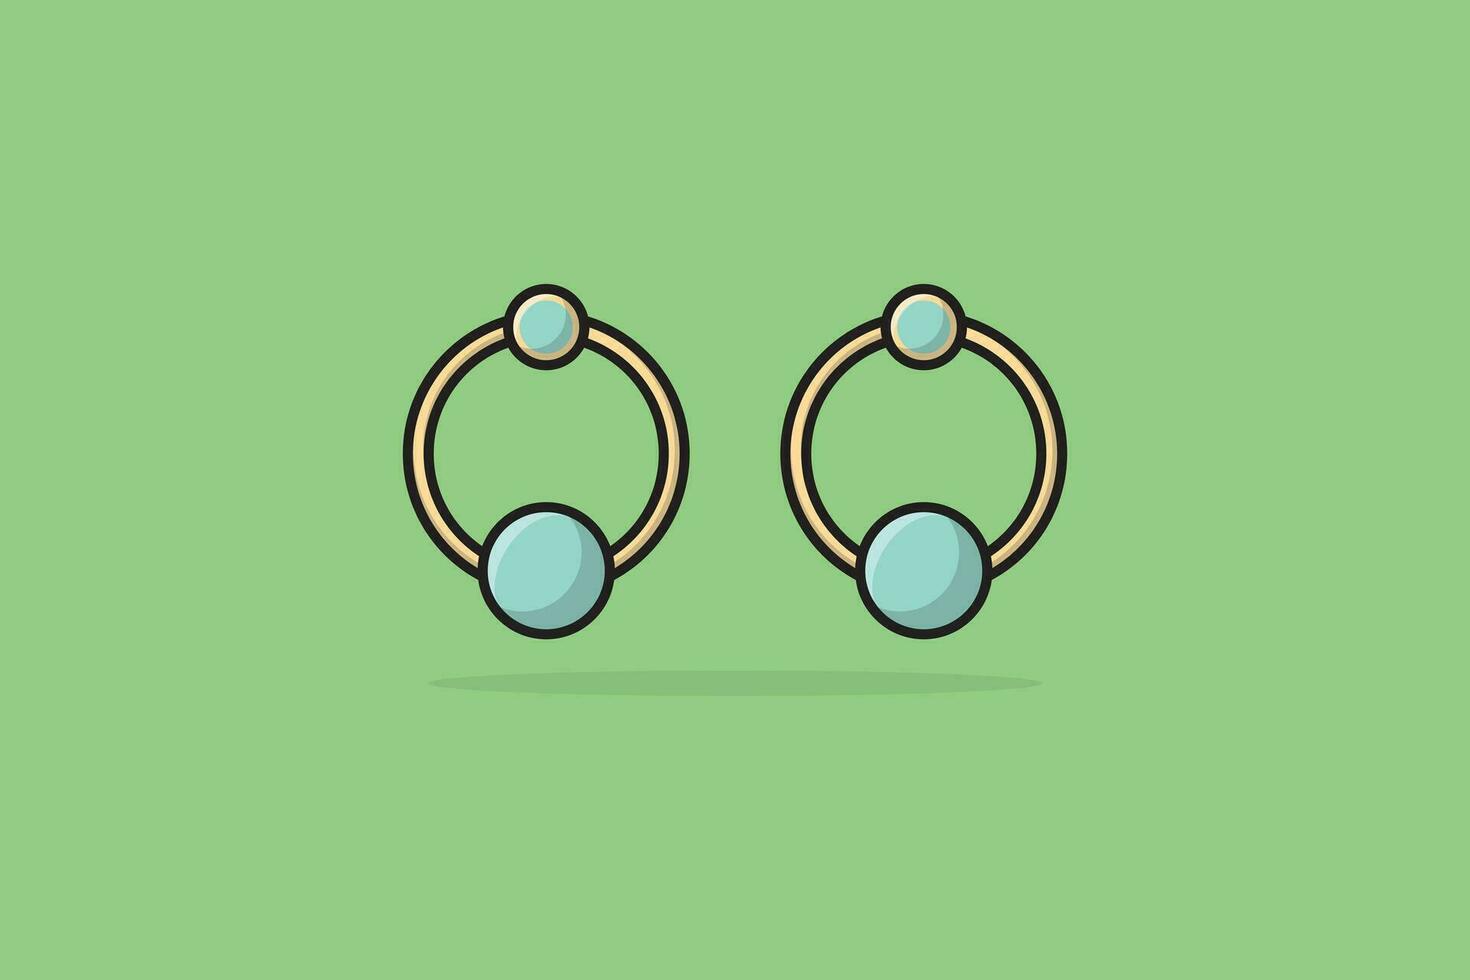 Round shape earrings jewelry vector illustration. Beauty fashion objects icon concept. New arrival women jewelry earrings with gemstone vector design.